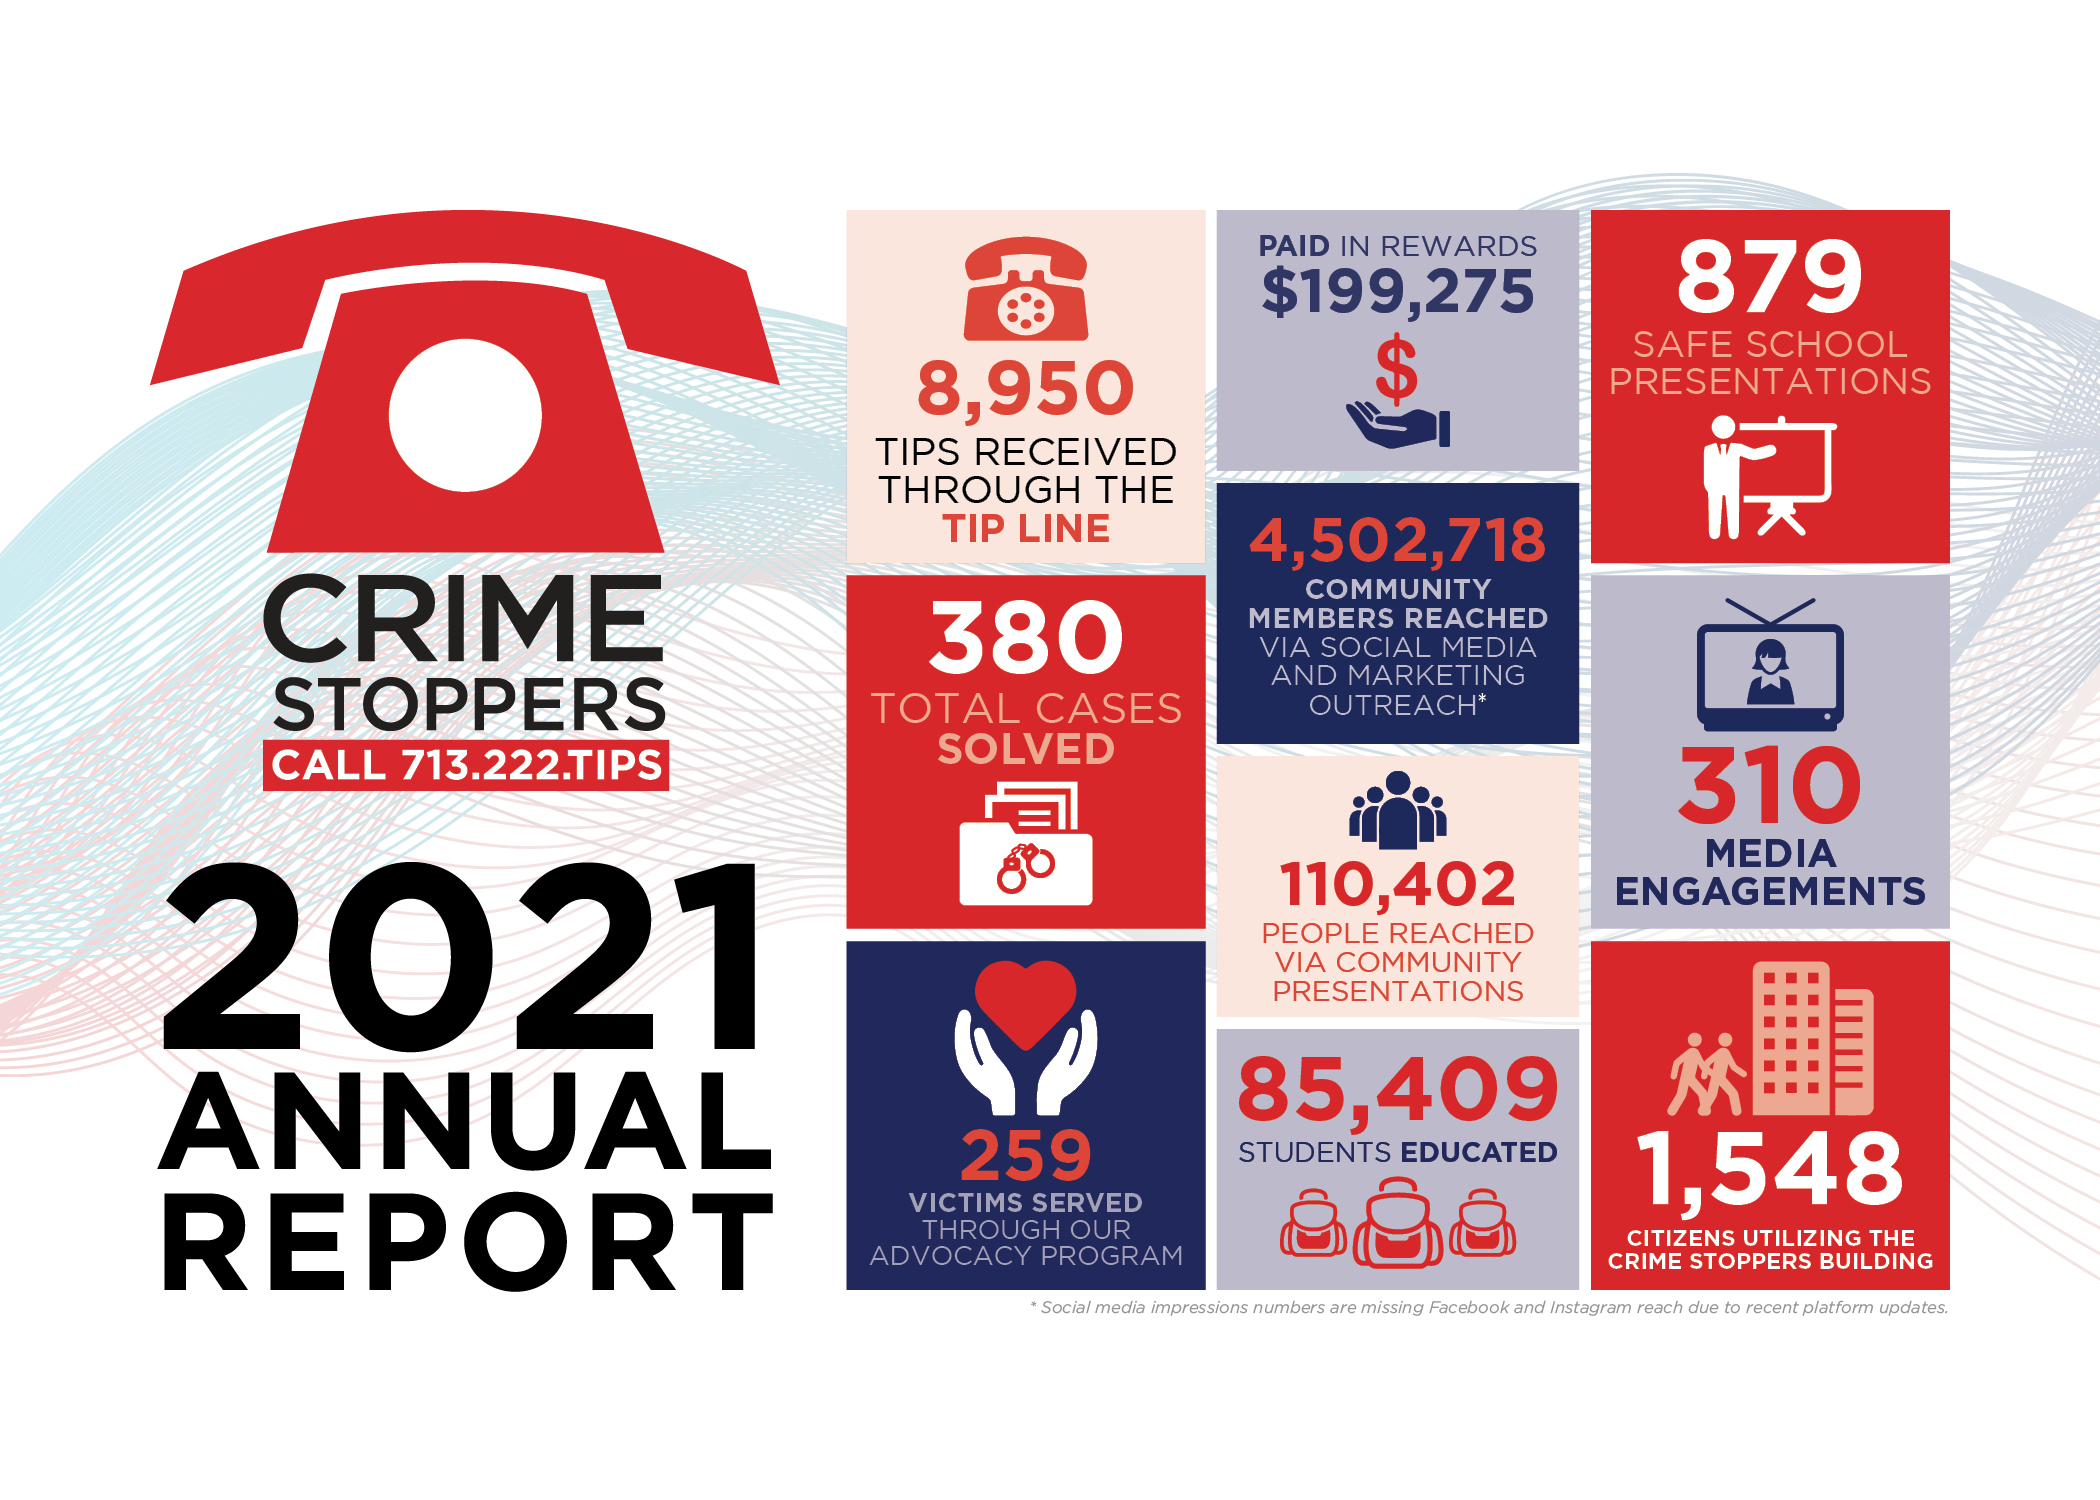 2021 Annual Report Postcard WEB Houston Crime Stoppers